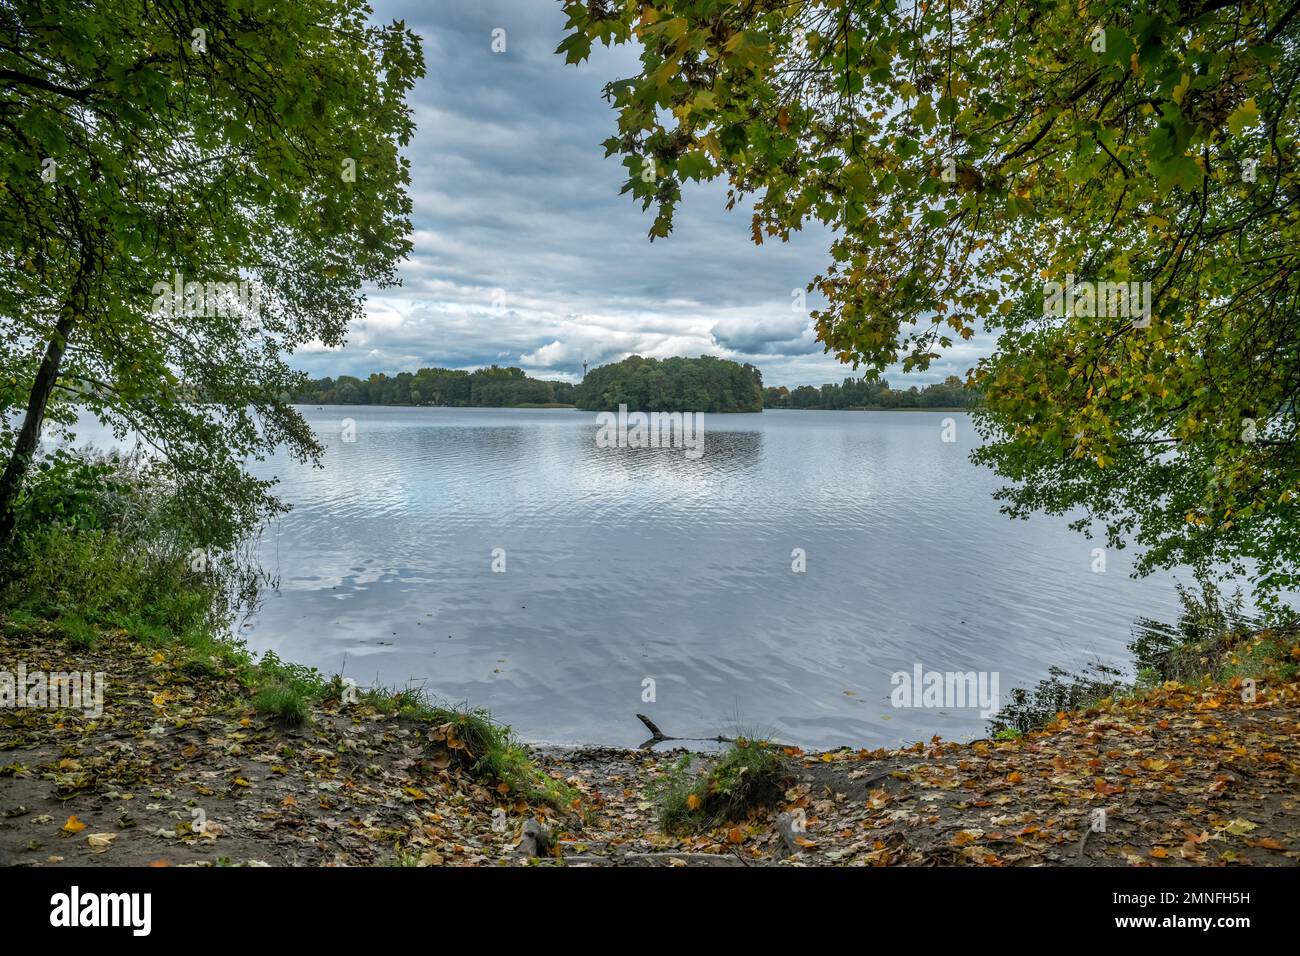 Lac Ruppin, district d'Ostprignitz-Ruppin, Brandebourg, Allemagne Banque D'Images